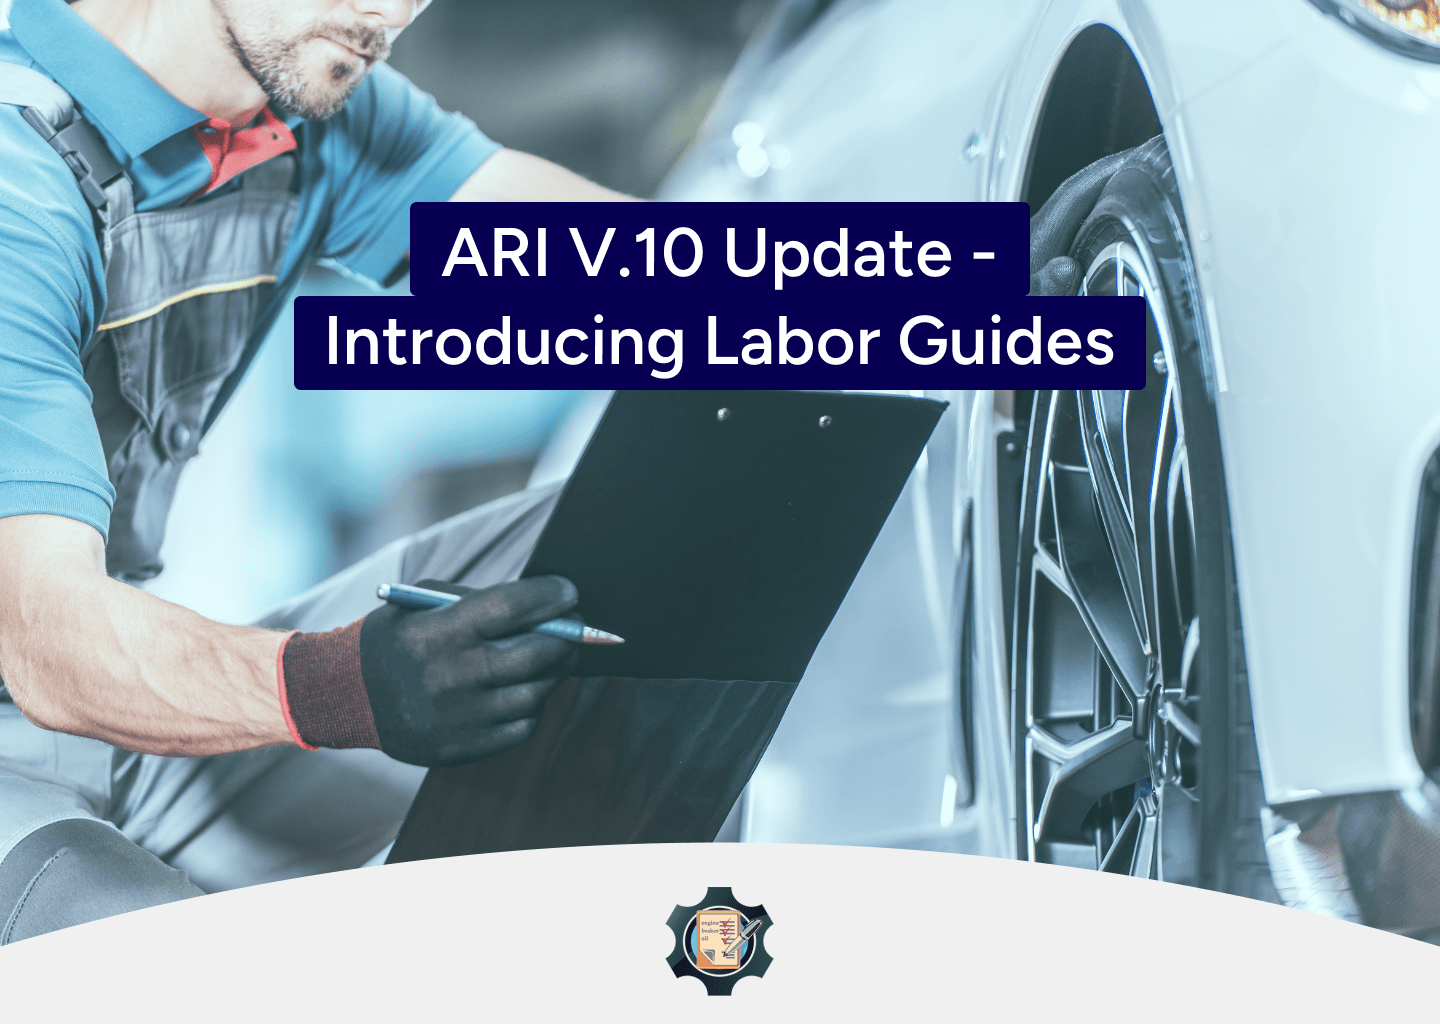 ARI V.10 Update – Introducing Labor Guides with Mitchell 1 ProDemand